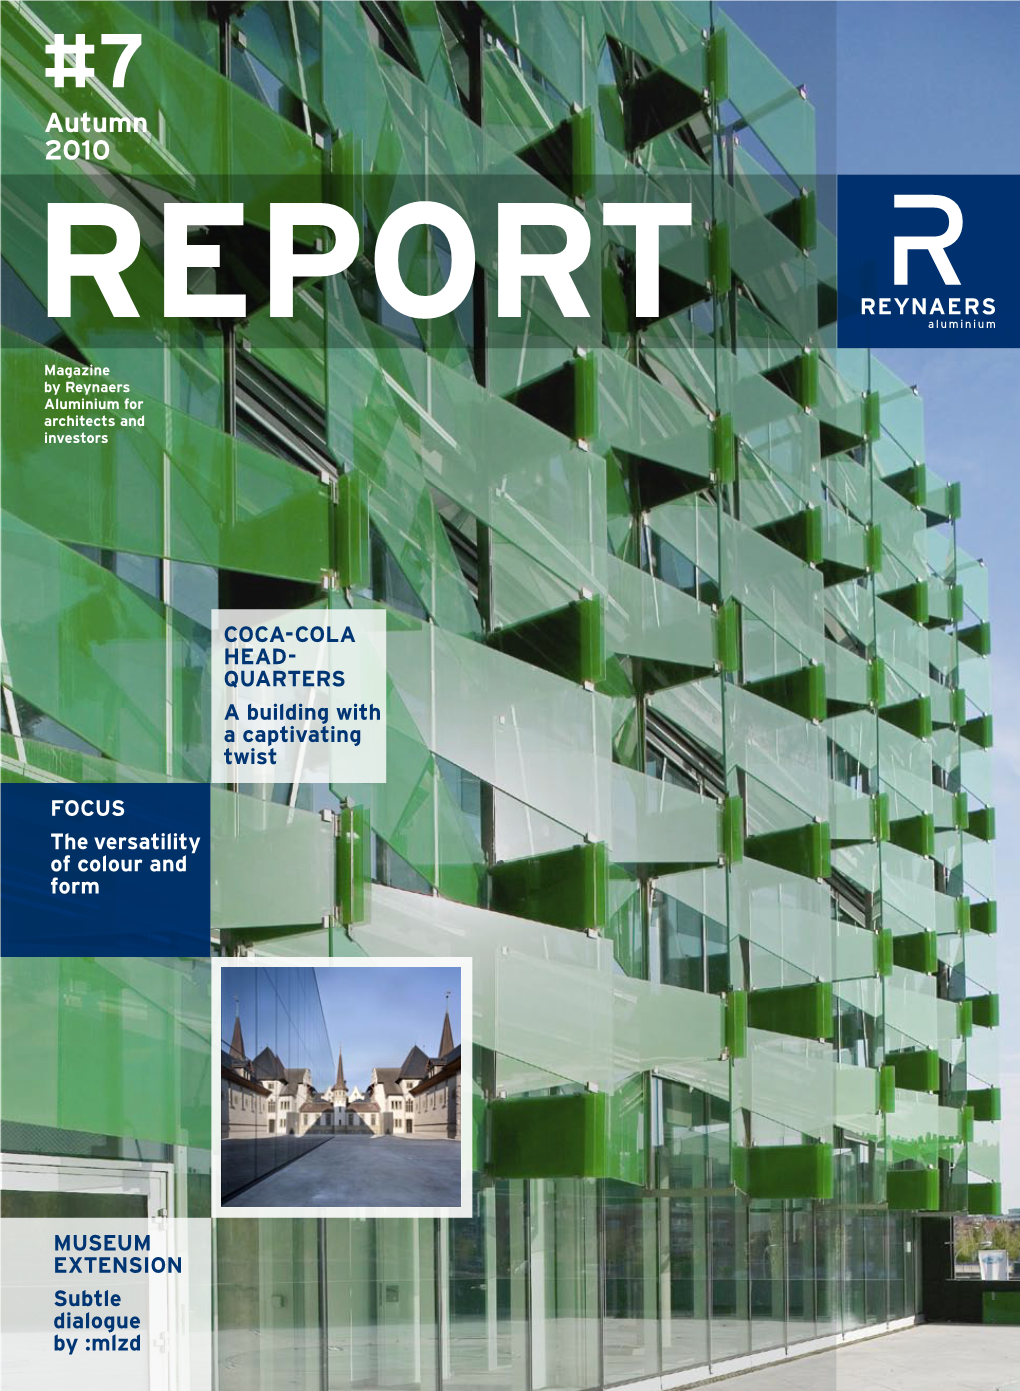 Autumn 2010 REPORT Magazine by Reynaers Aluminium for Architects and Investors